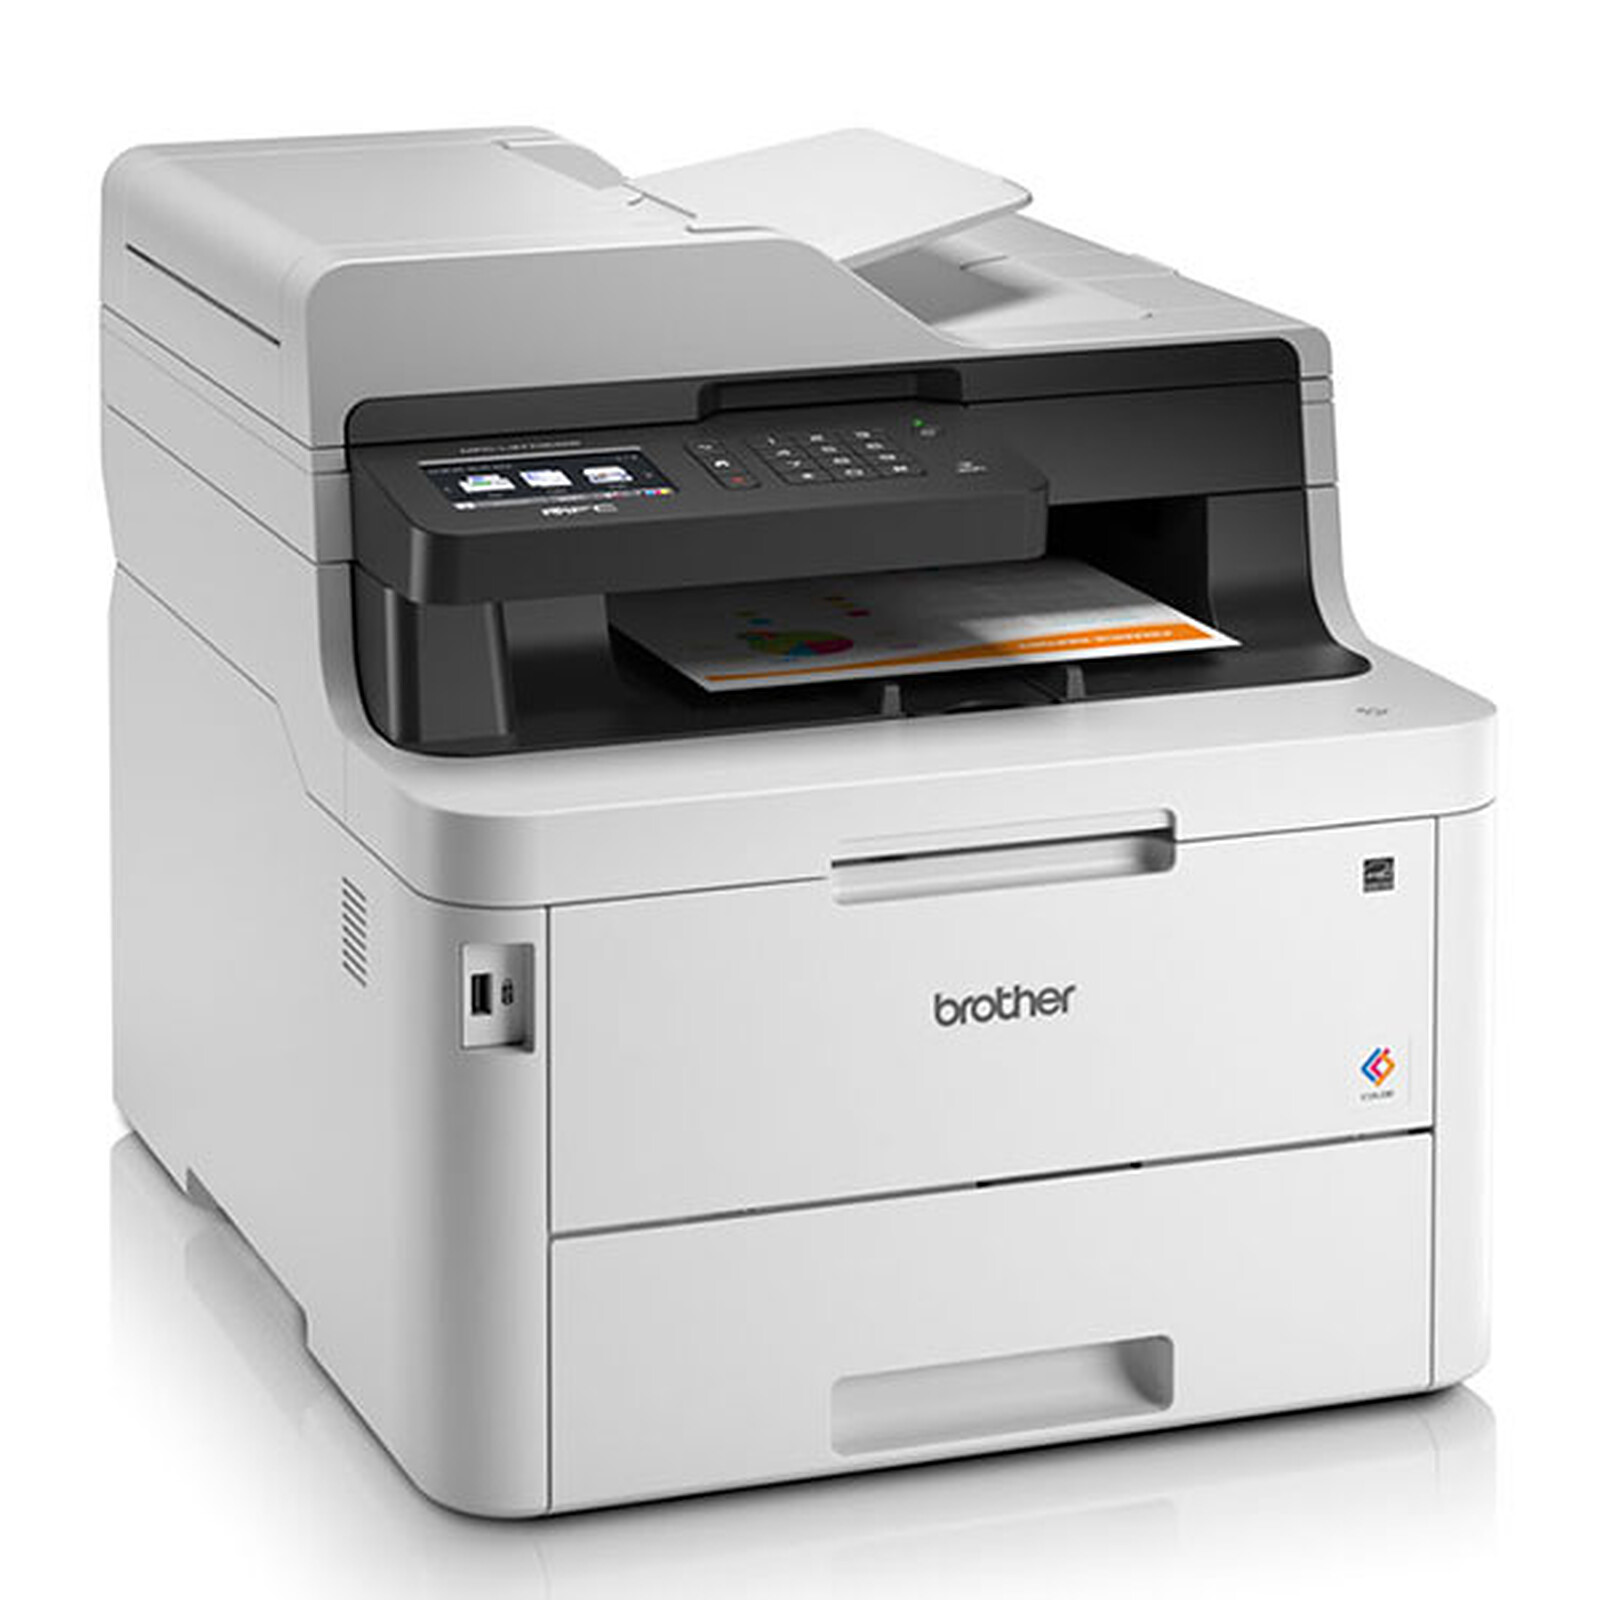 Brother MFC-L3770CDW - All-in-one printer - LDLC 3-year warranty